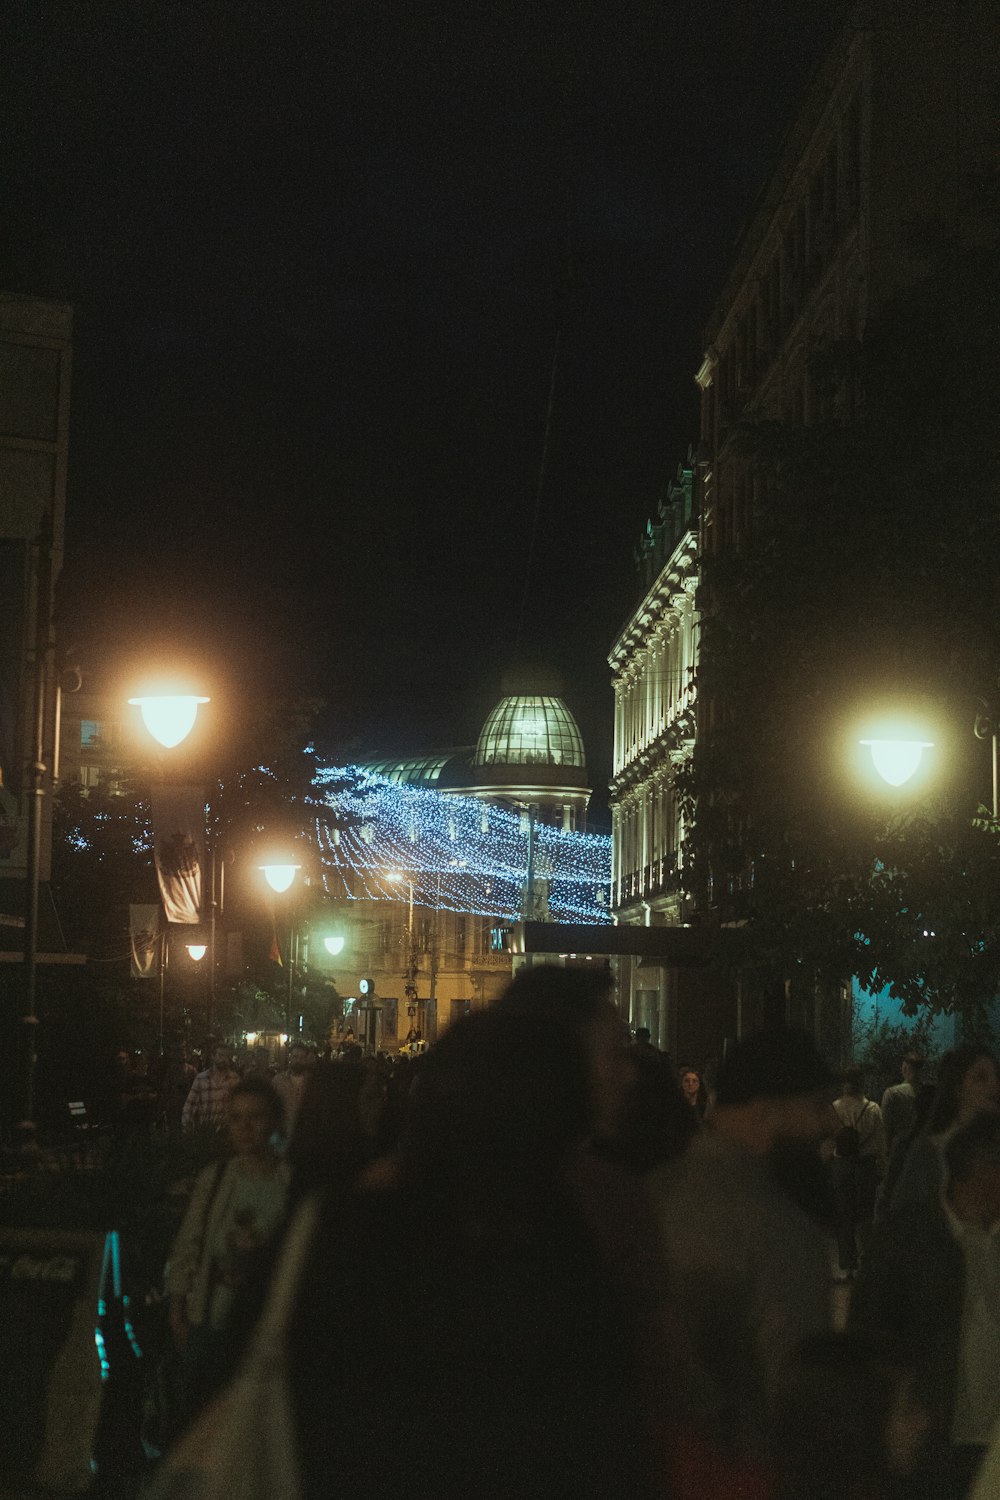 a crowd of people walking down a street at night